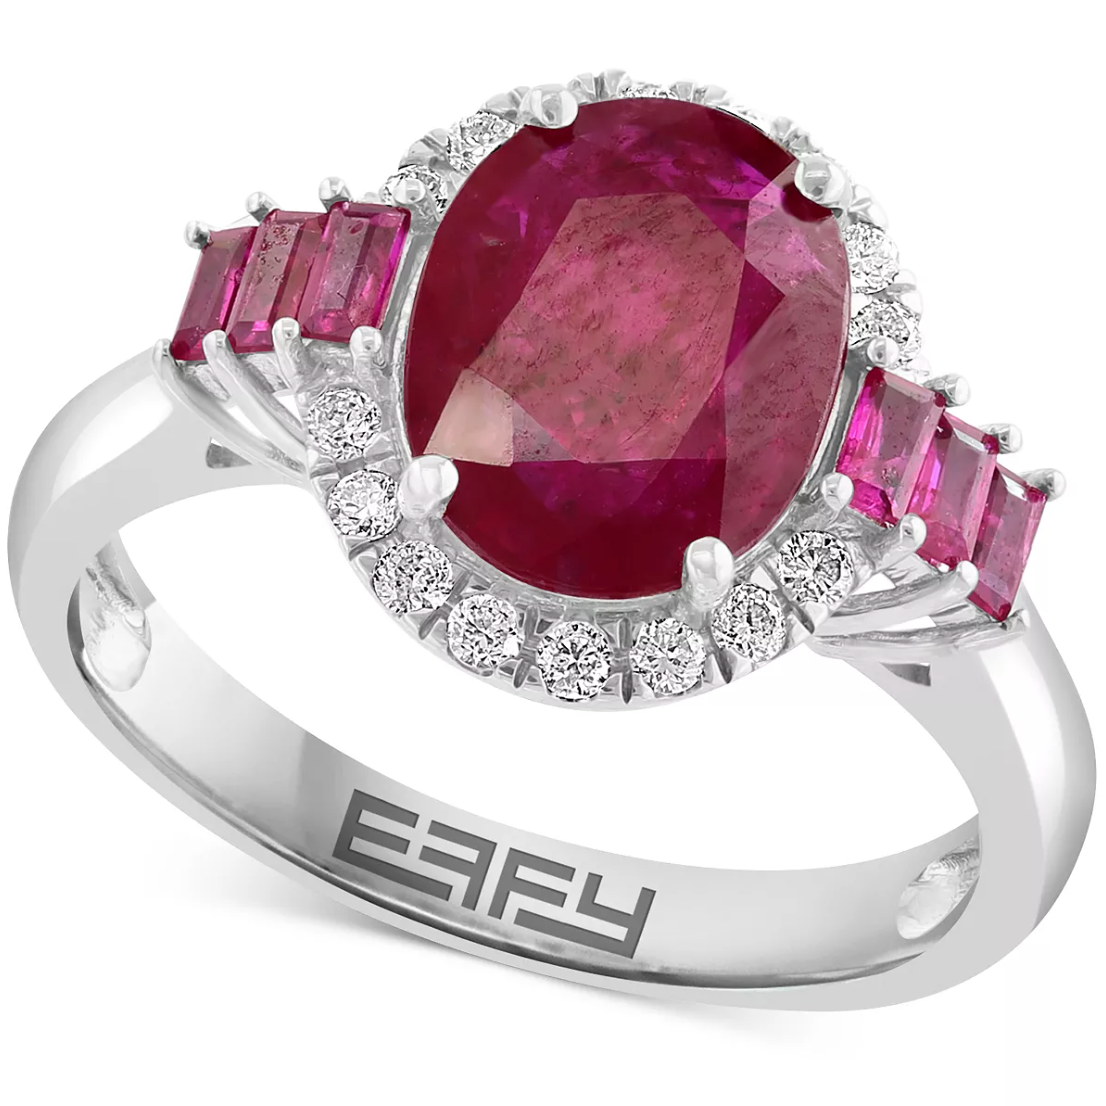 EFFY Limited Edition Ruby & Diamond Ring in 14k White Gold